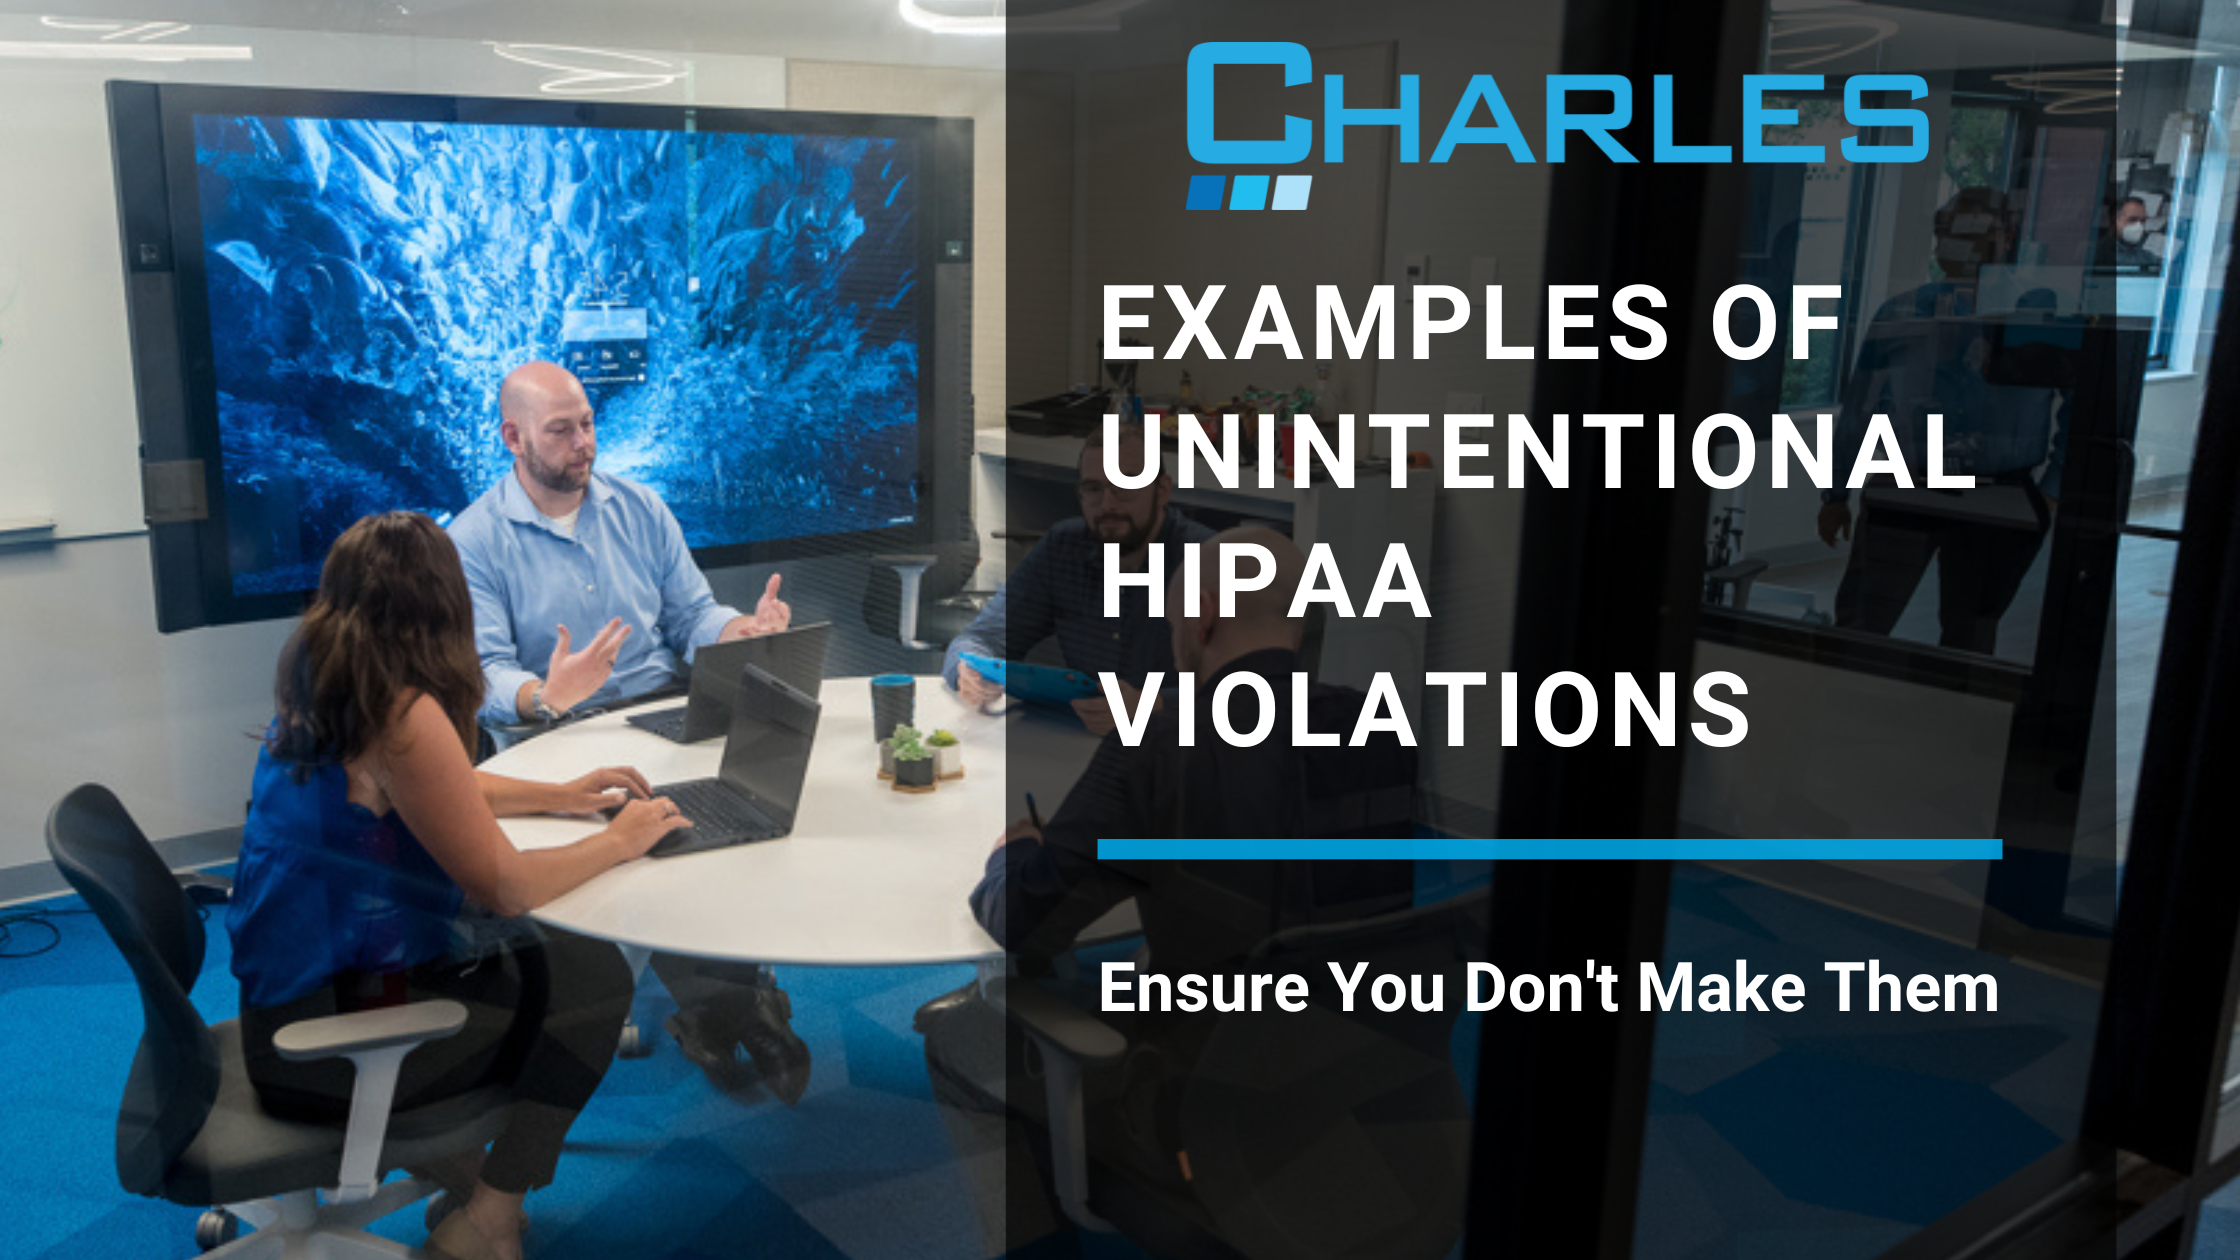 Examples of Unintentional HIPAA Violations: Ensure You Don’t Make Them